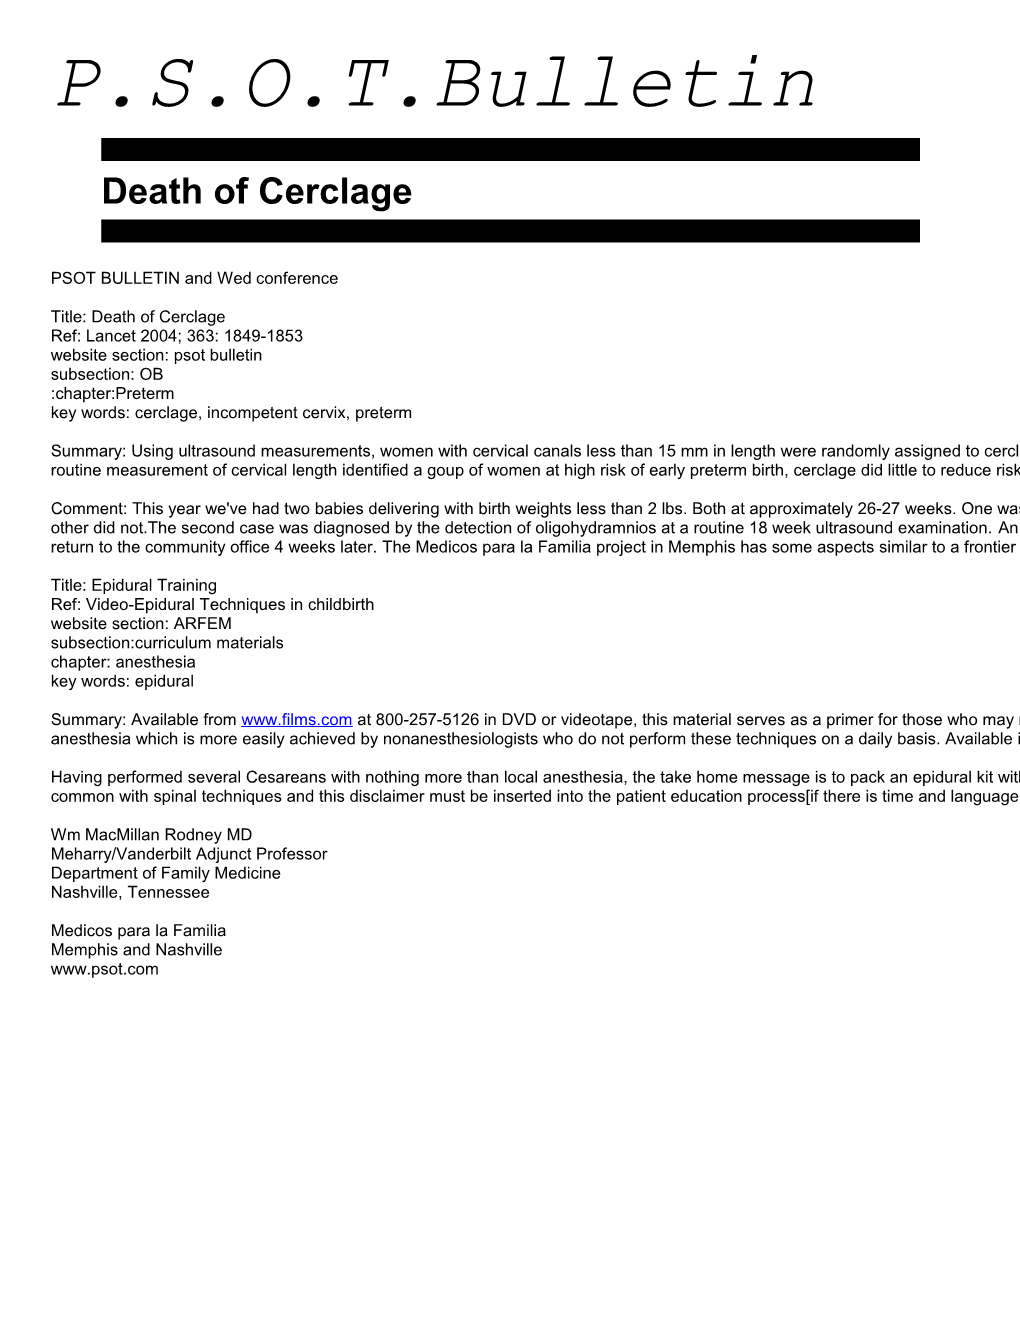 Death of Cerclage